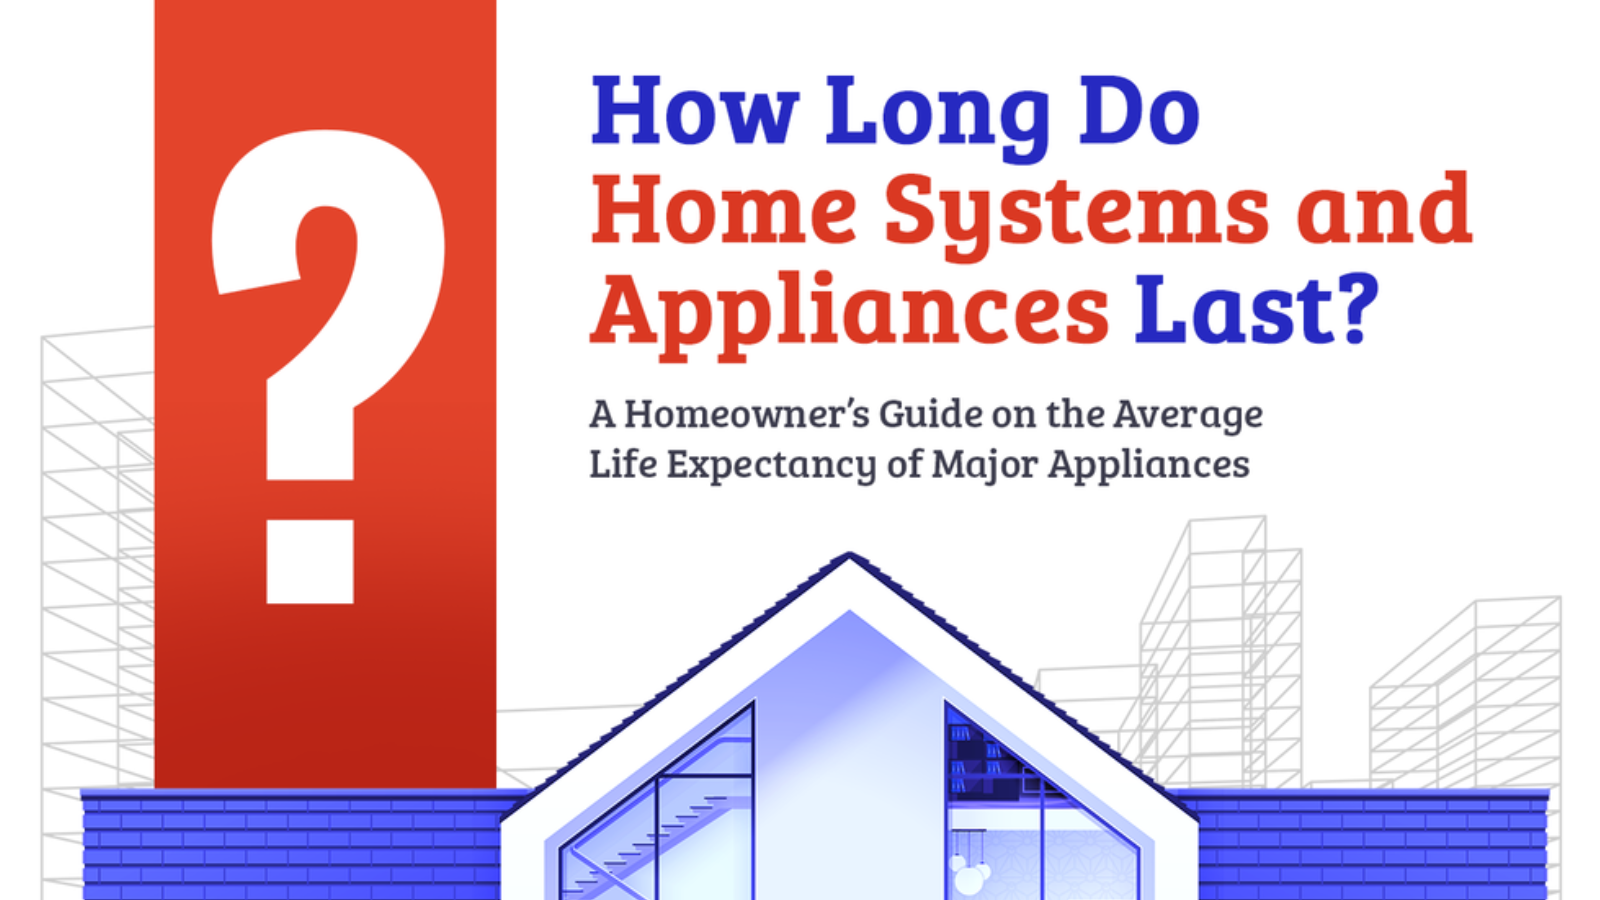 How Long Do Home Systems and Appliances Last?